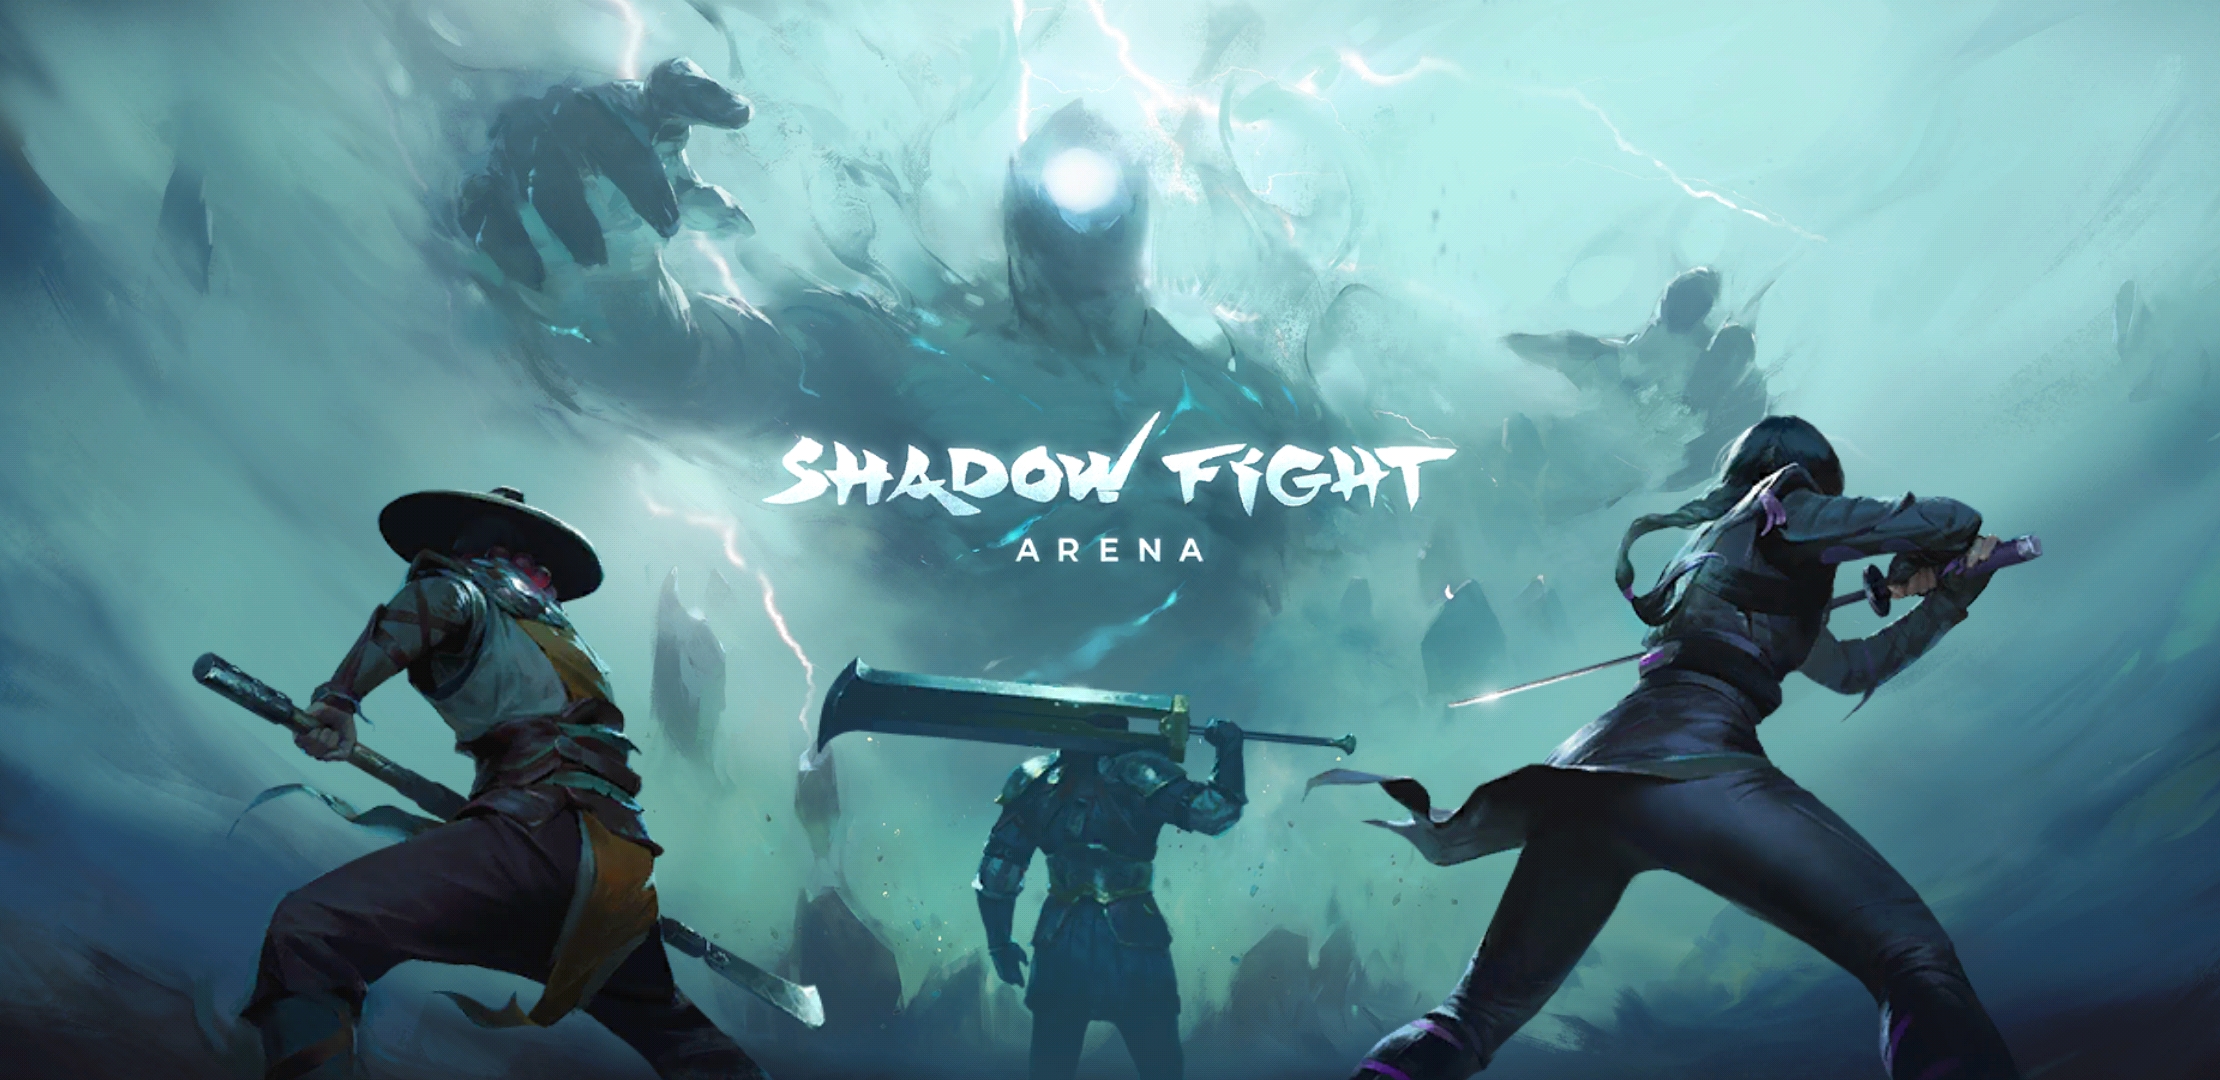 shadow fight4 arena download